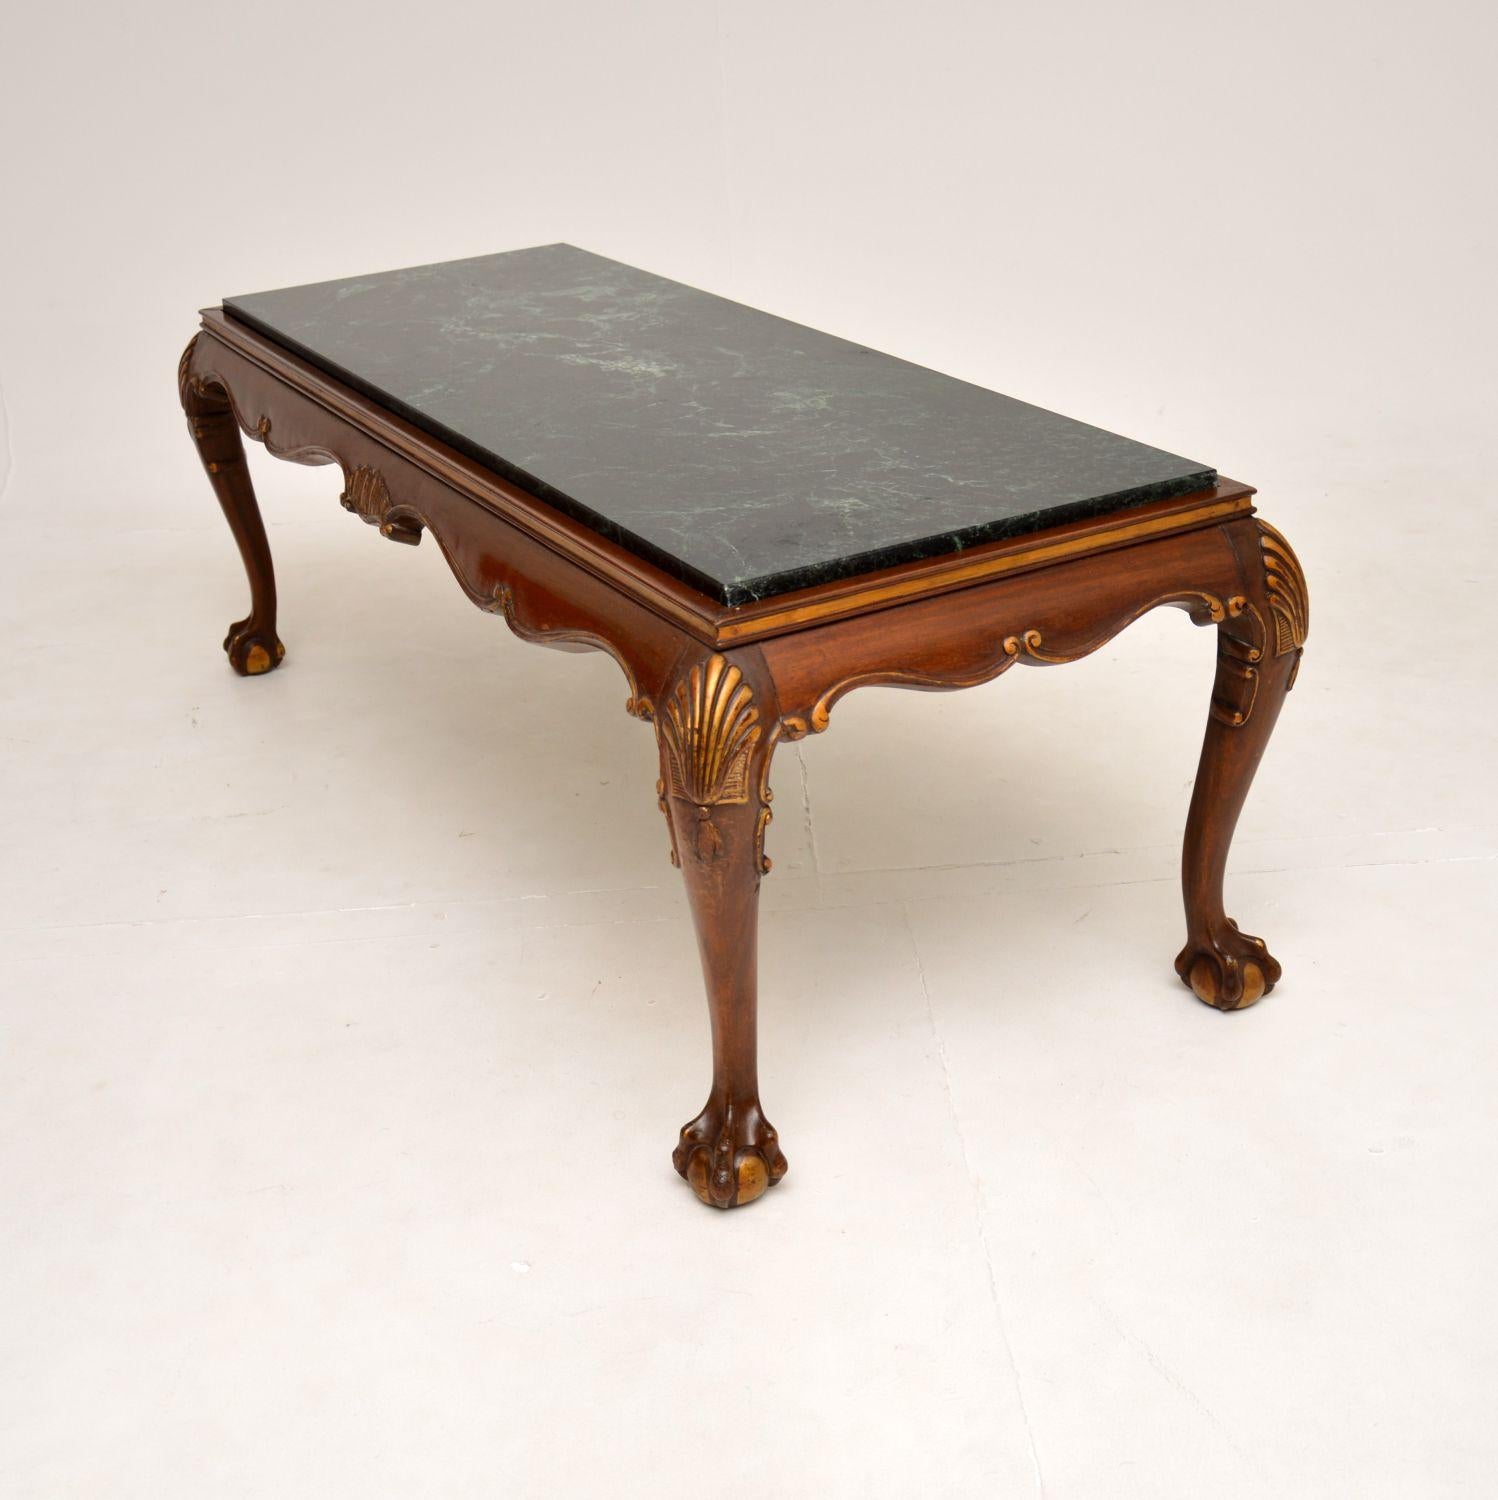 British Antique Marble Top Coffee Table